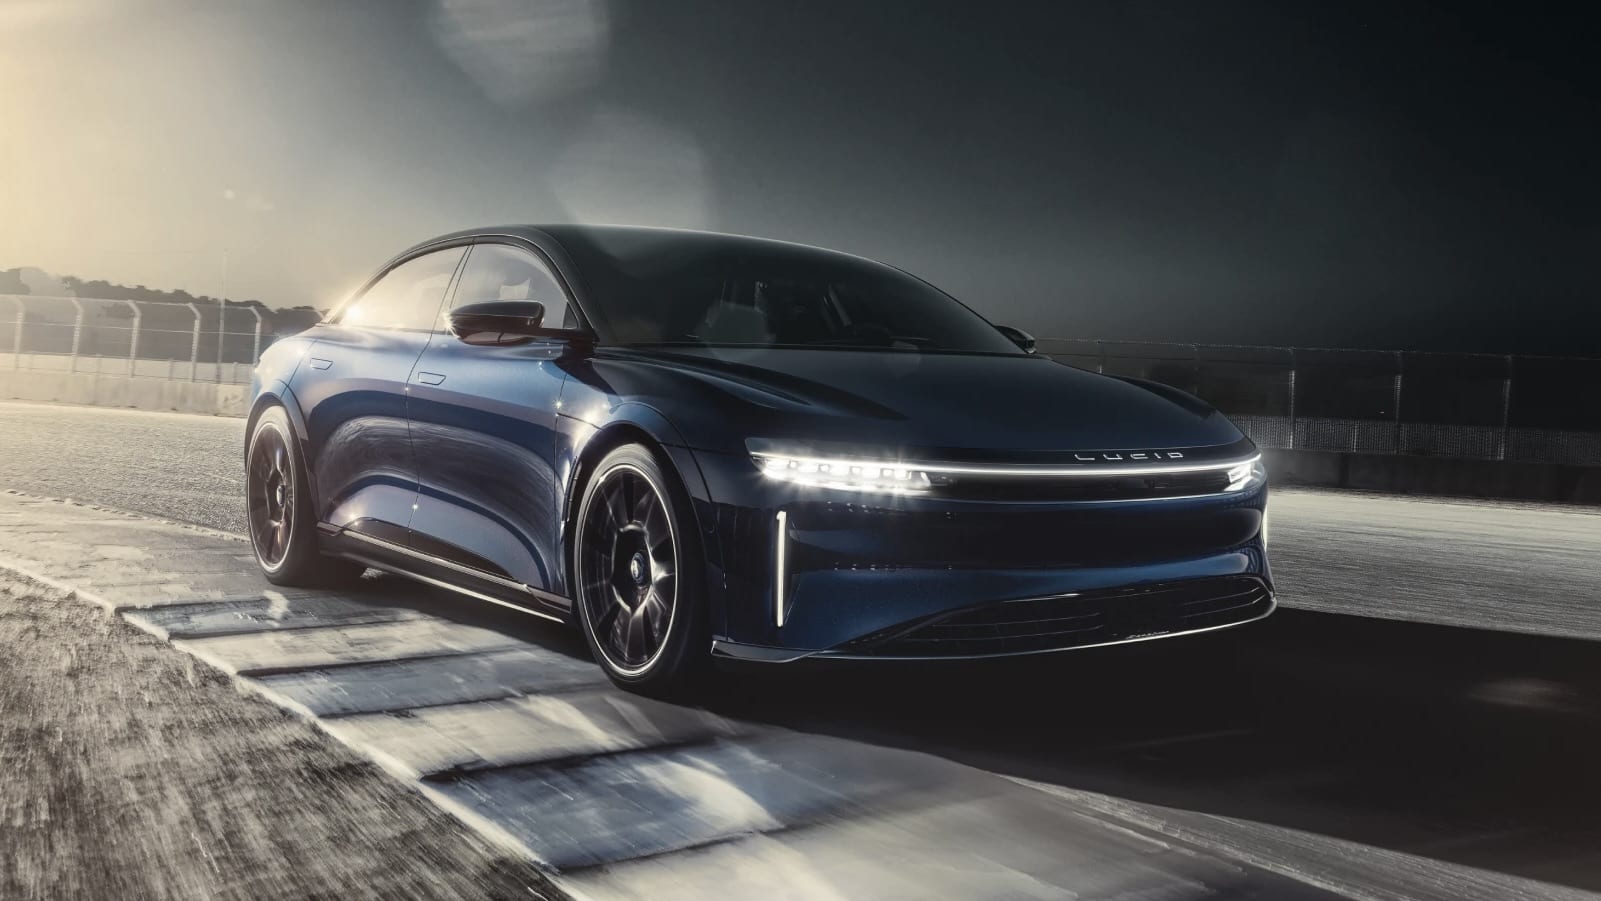 Lucid Air Sapphire is the most powerful sedan in the world